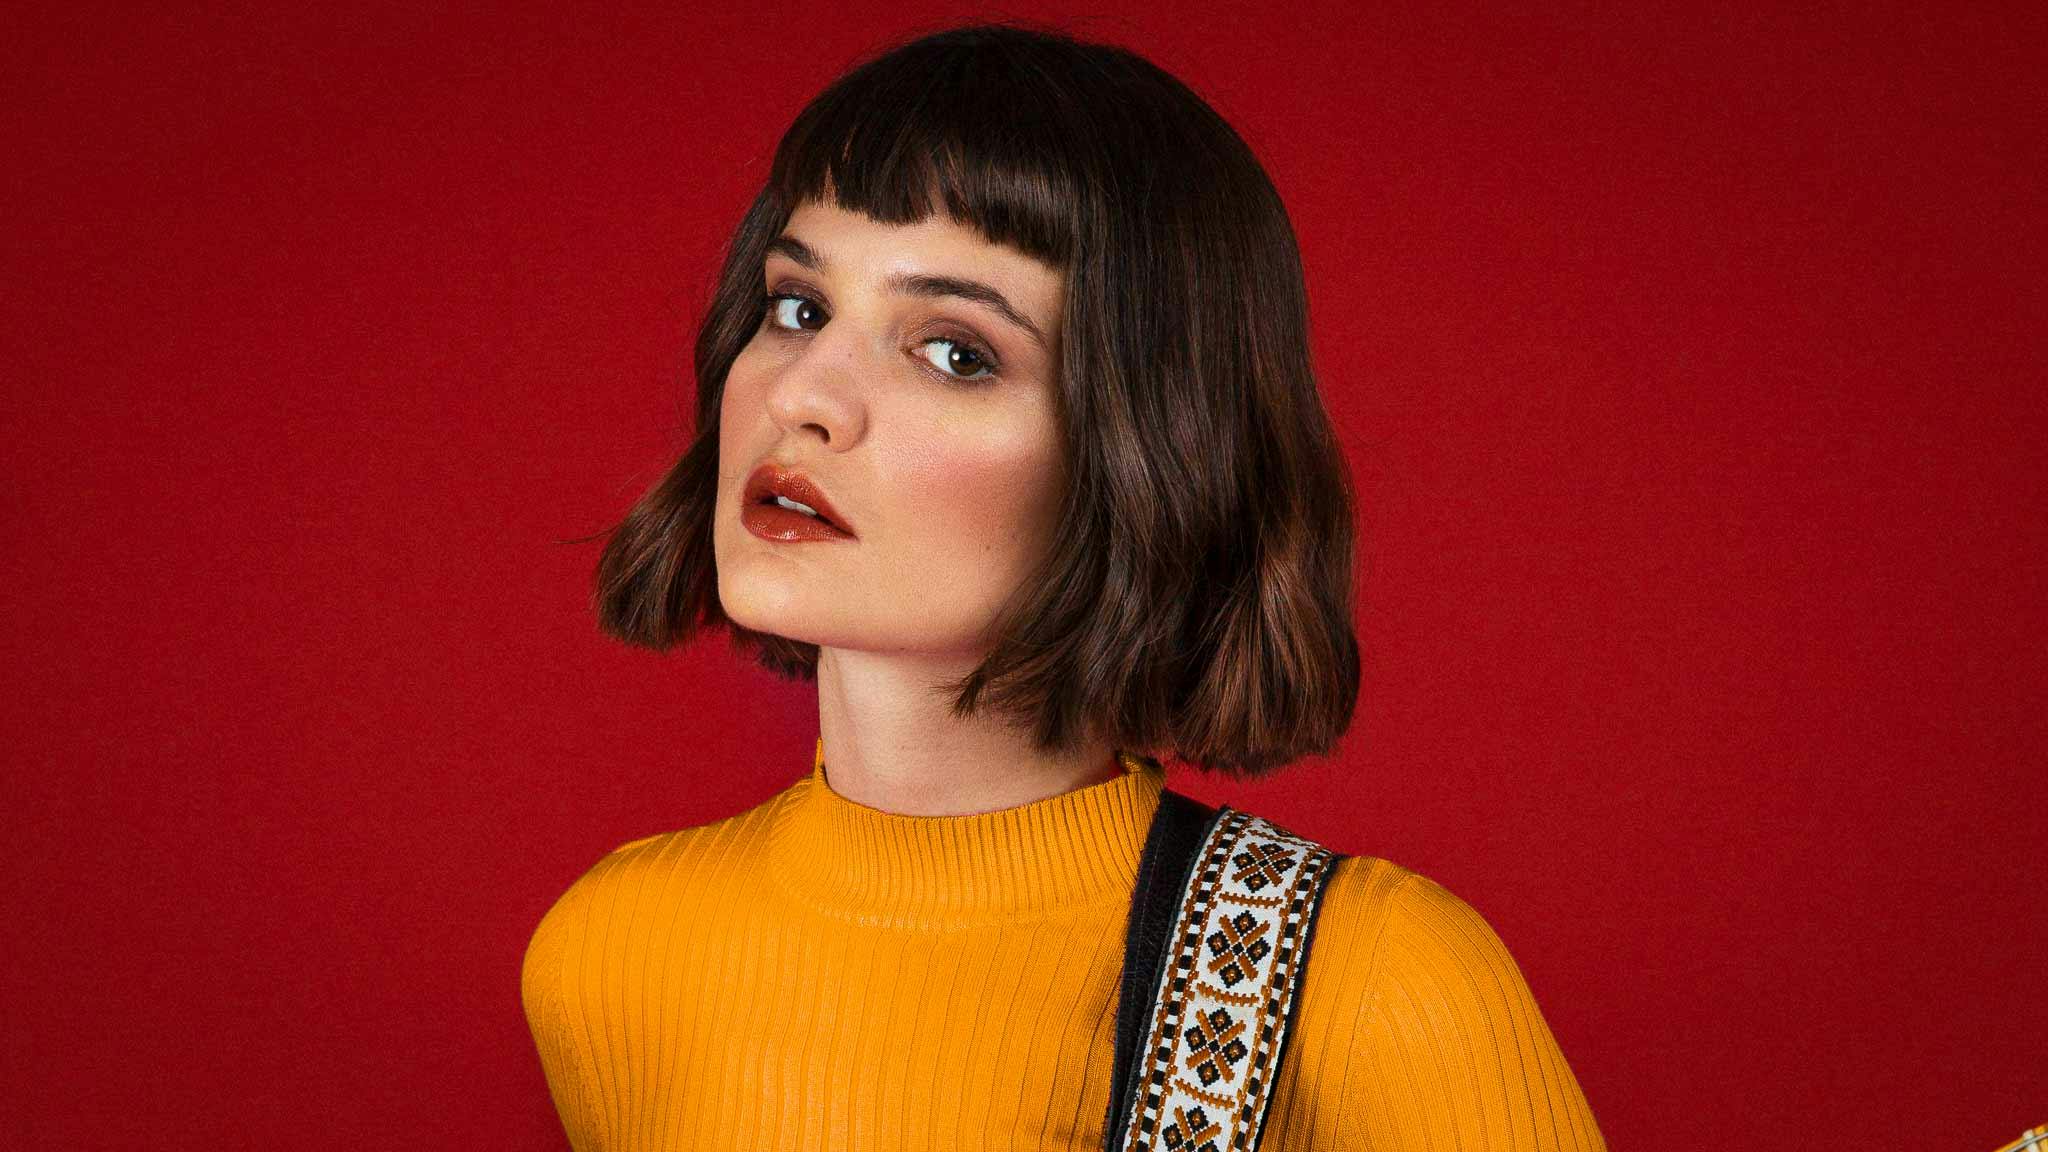 Violetta Zironi standing in front of a red wall wearing a yellow sweater